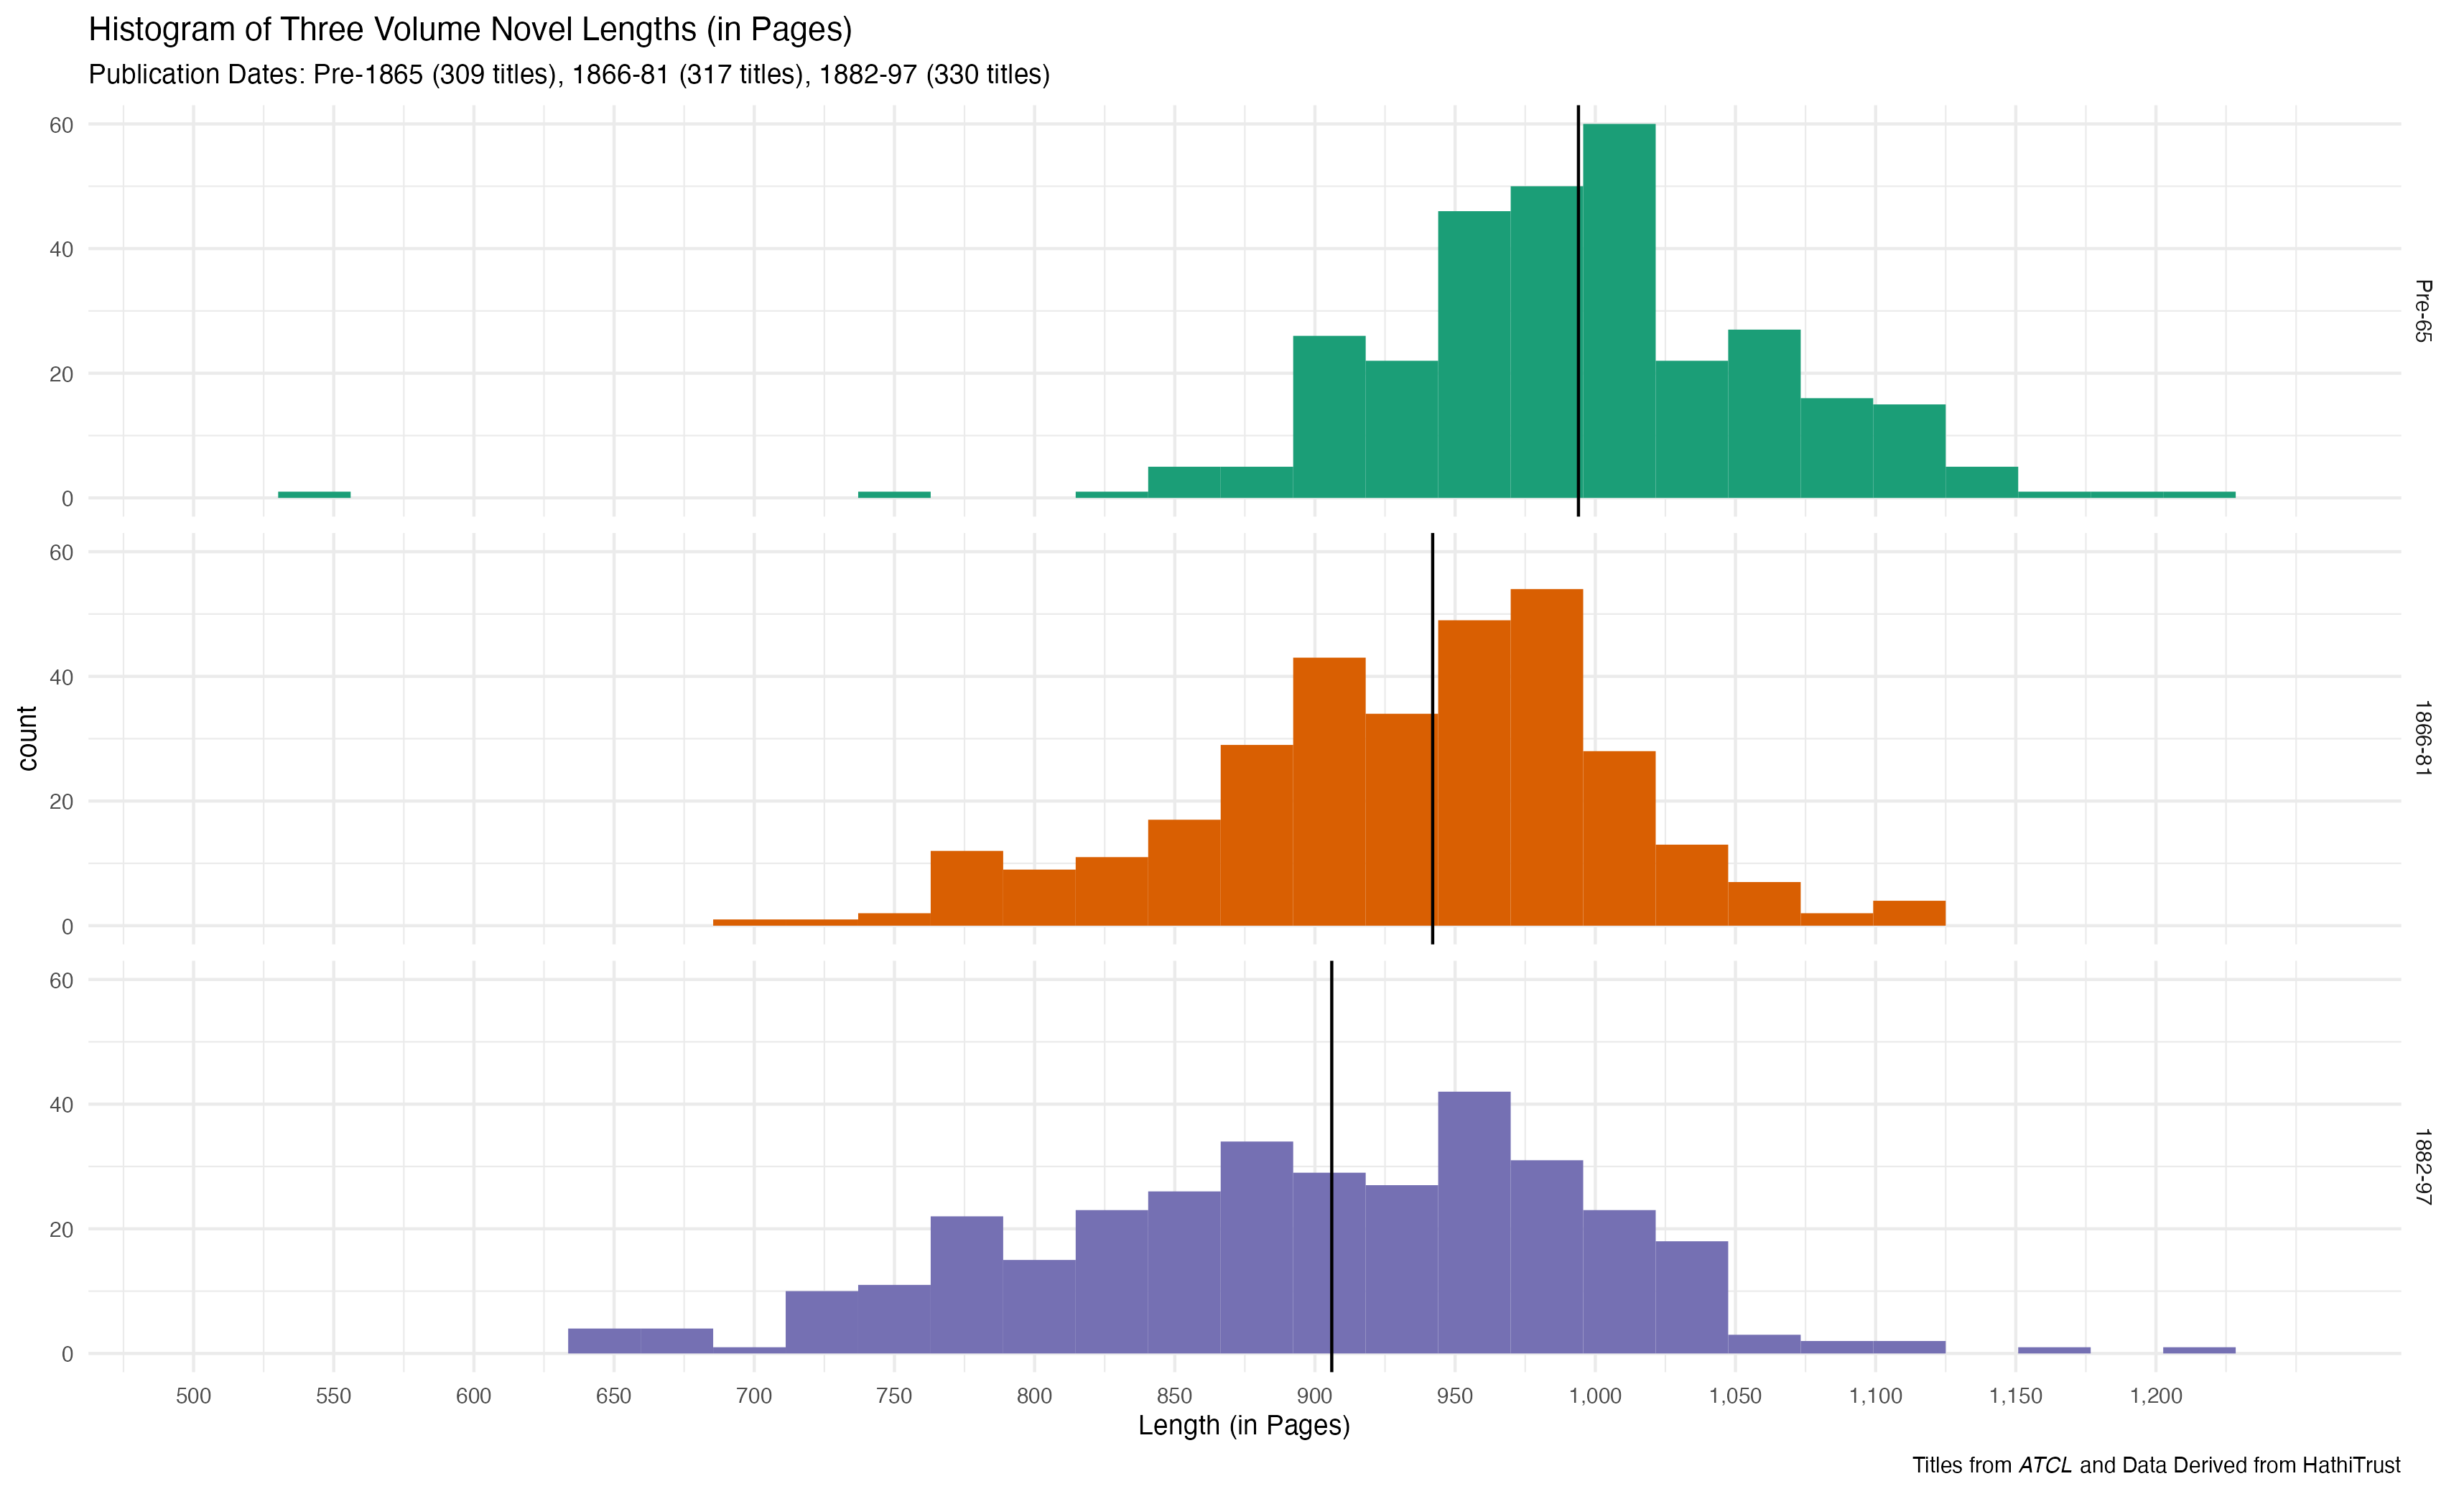 Histogram of Novel Lengths (in pages) Divided into Three periods